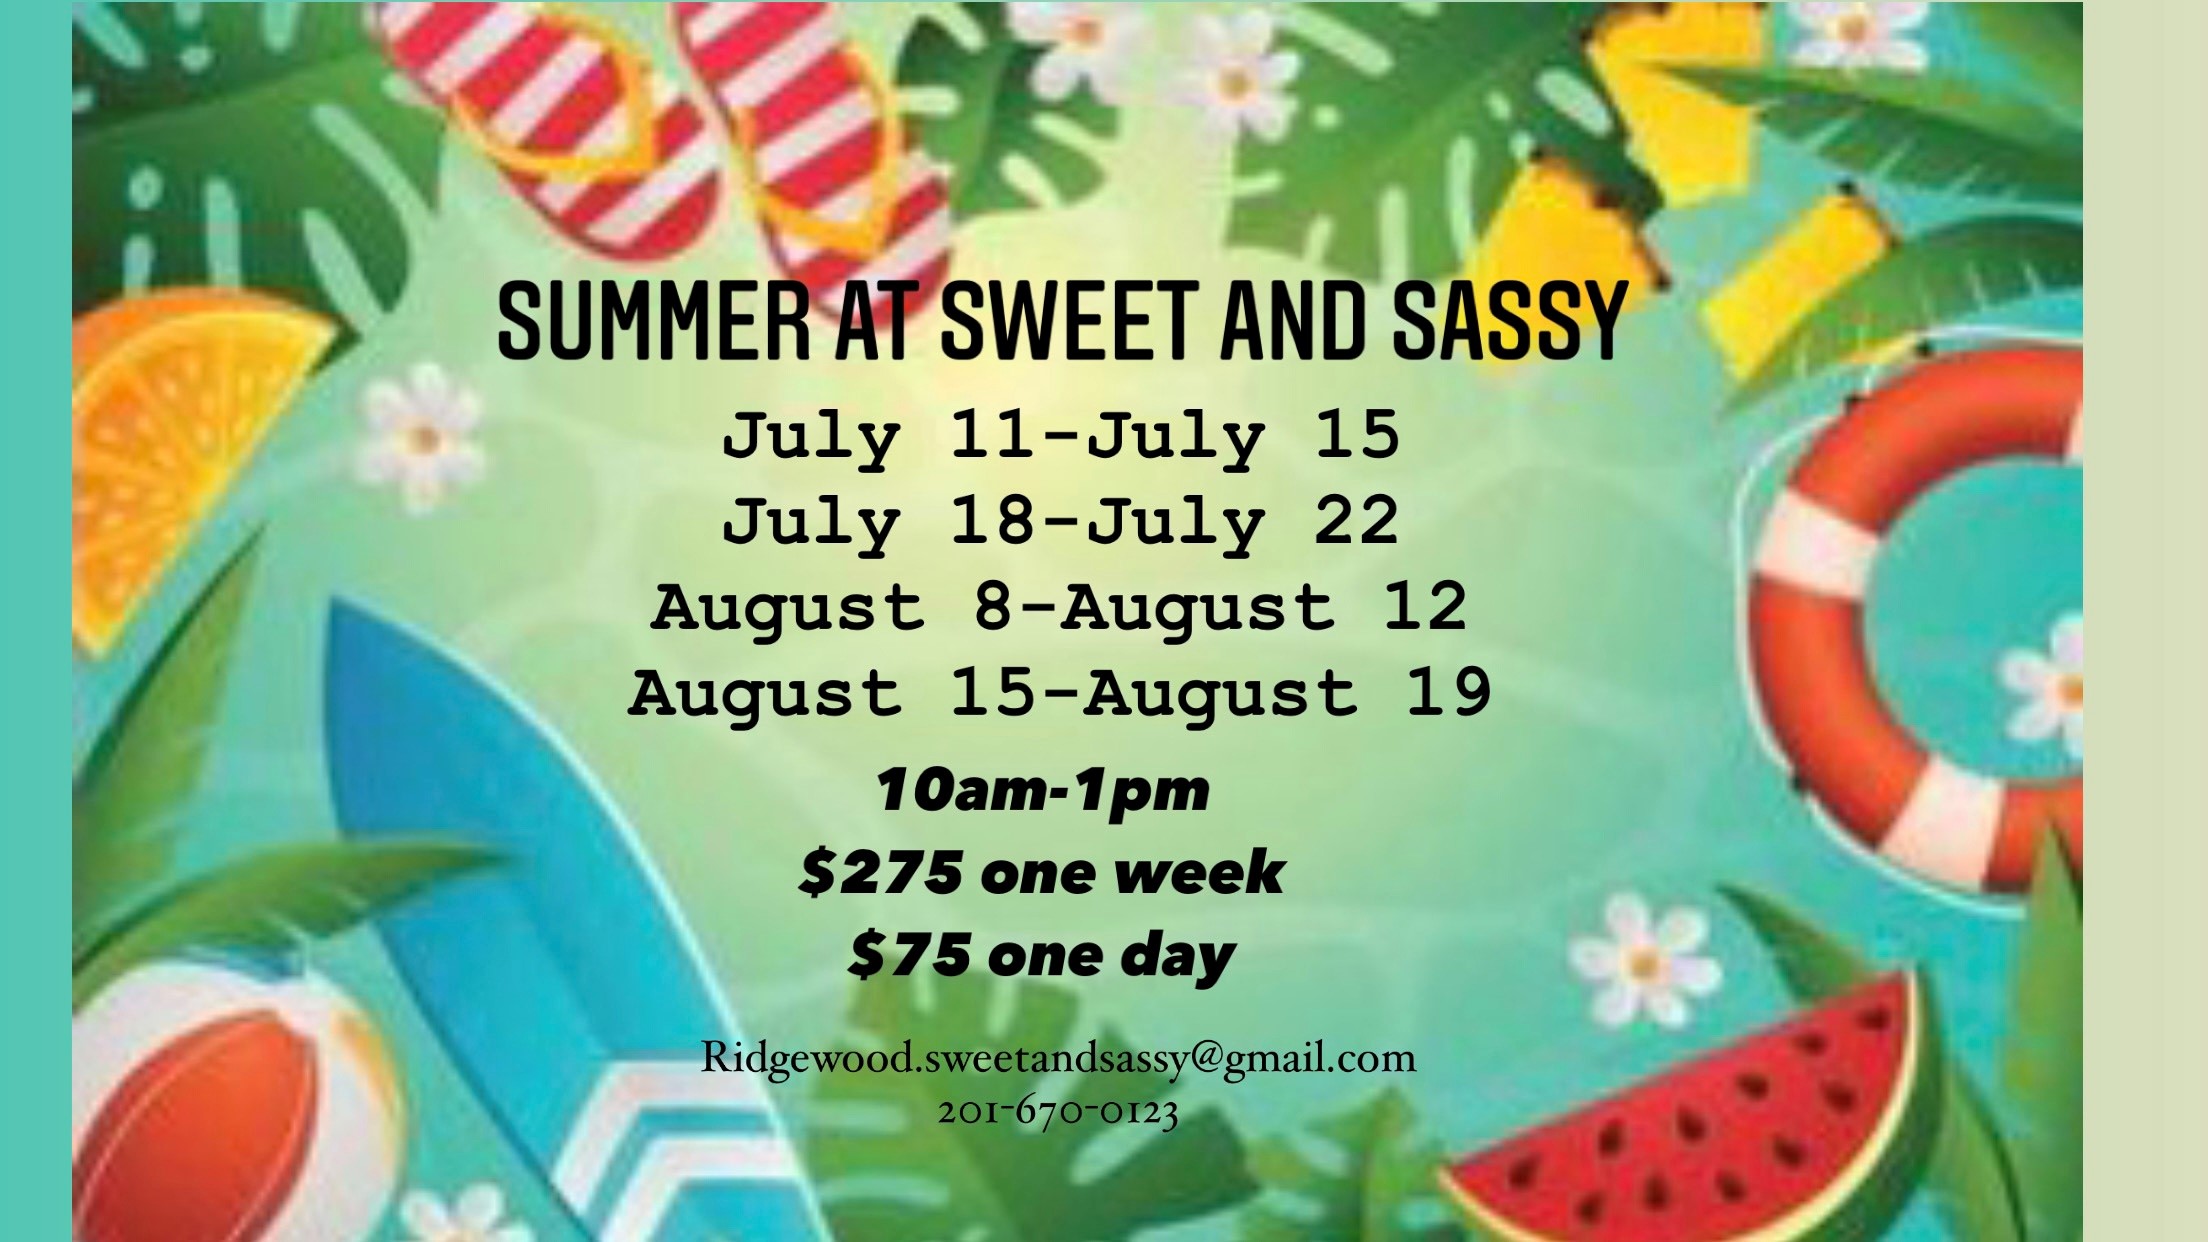 Summer camp events for kids at Sweet & Sassy